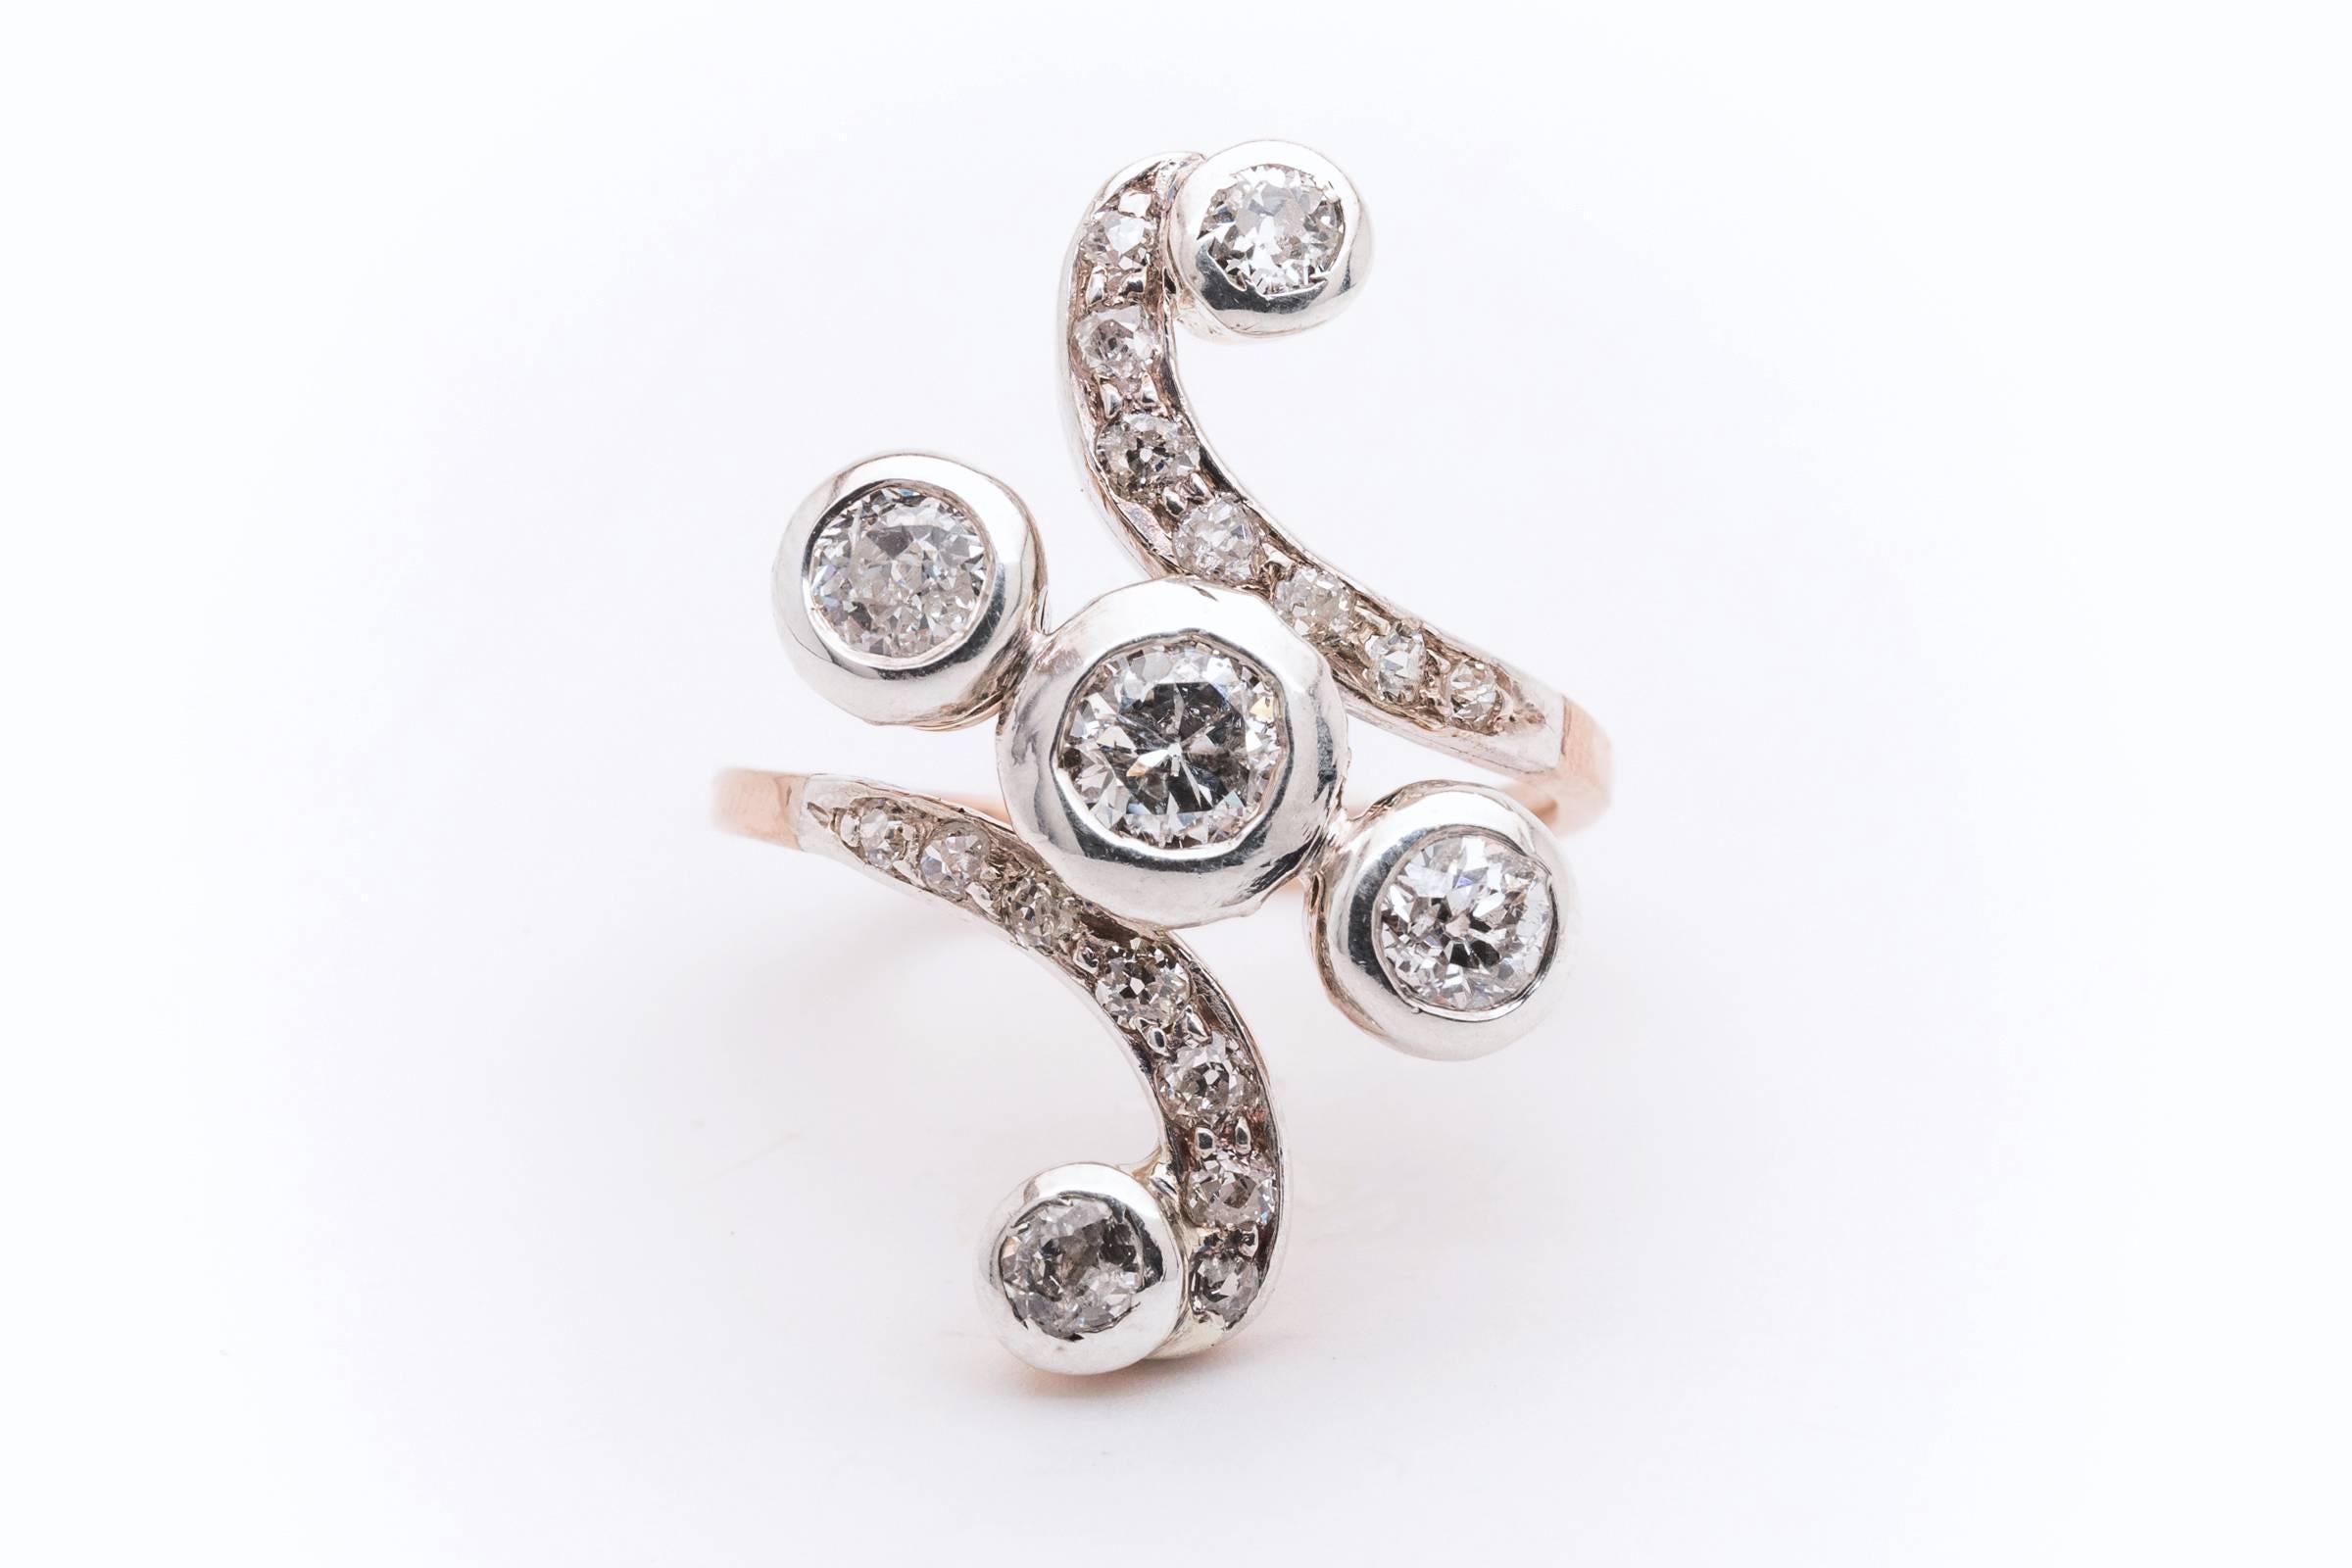 Beacon Hill Jewelers Presents:

A gorgeous victorian era diamond cocktail ring in rose gold and platinum. Set with a total of 1.72 carats of old European cut diamonds, this fantastic swirl design ring features a rose gold mounting and body with